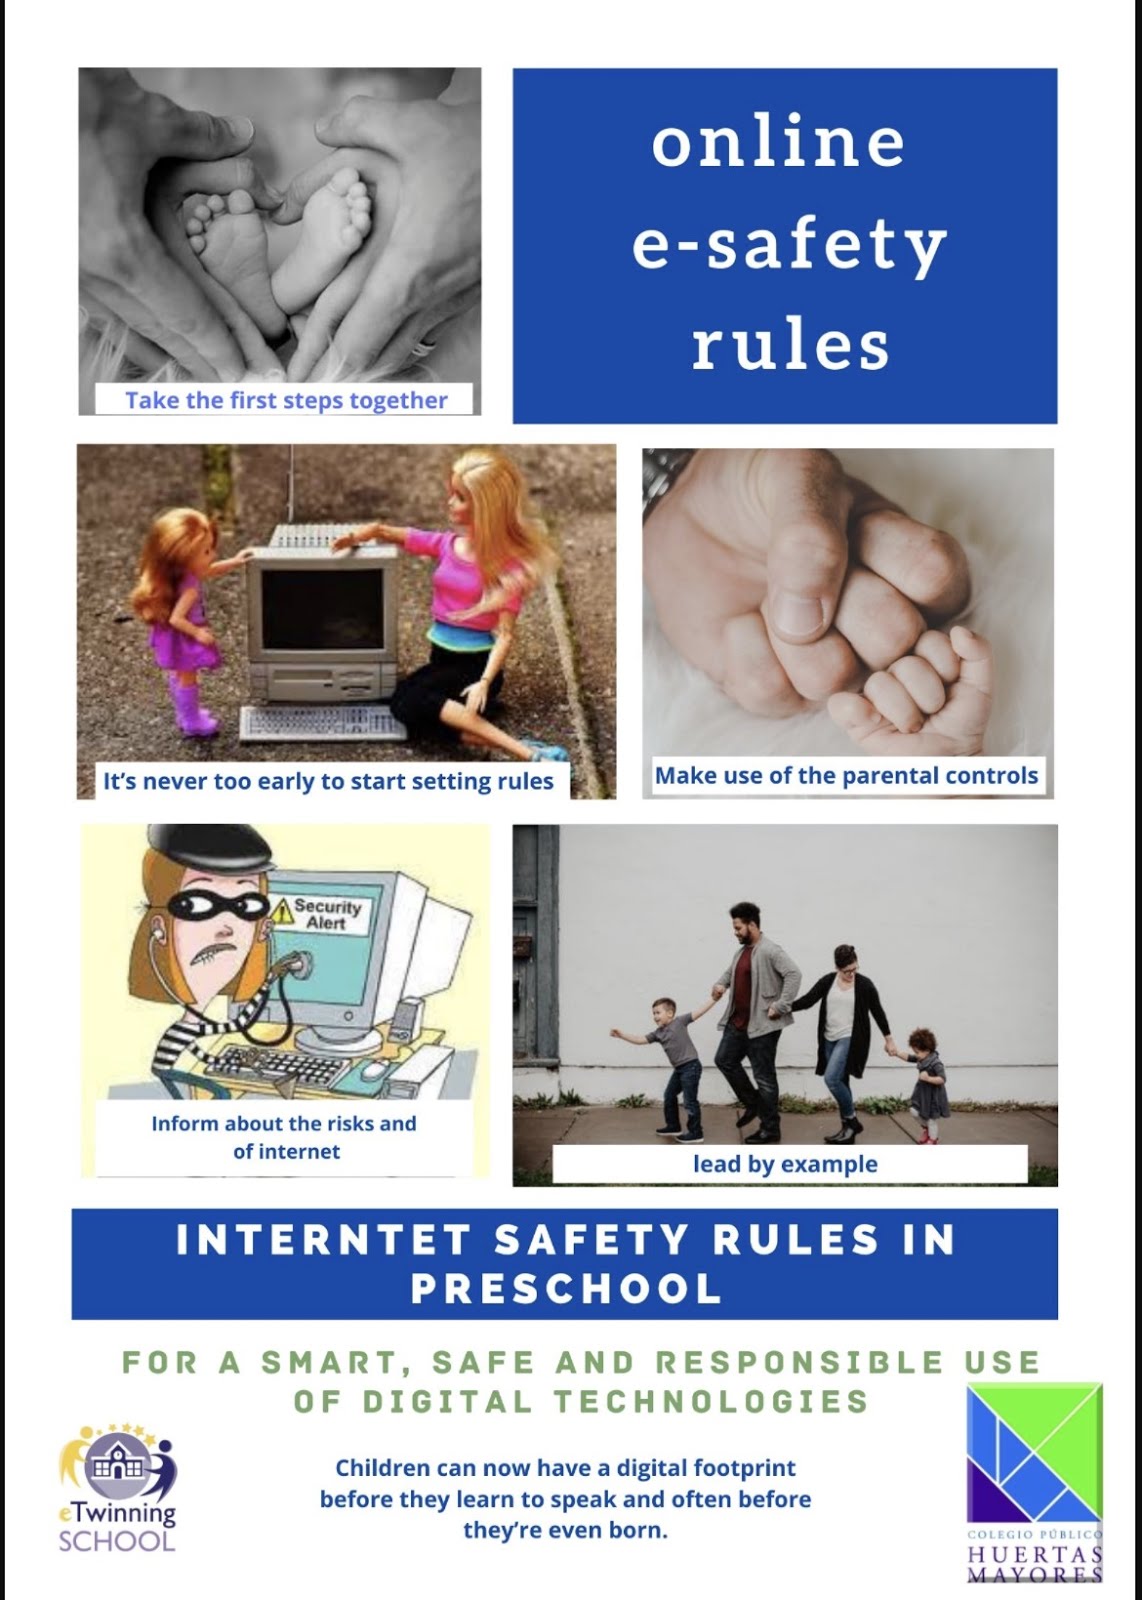 ONLINE e-SAFETY RULES